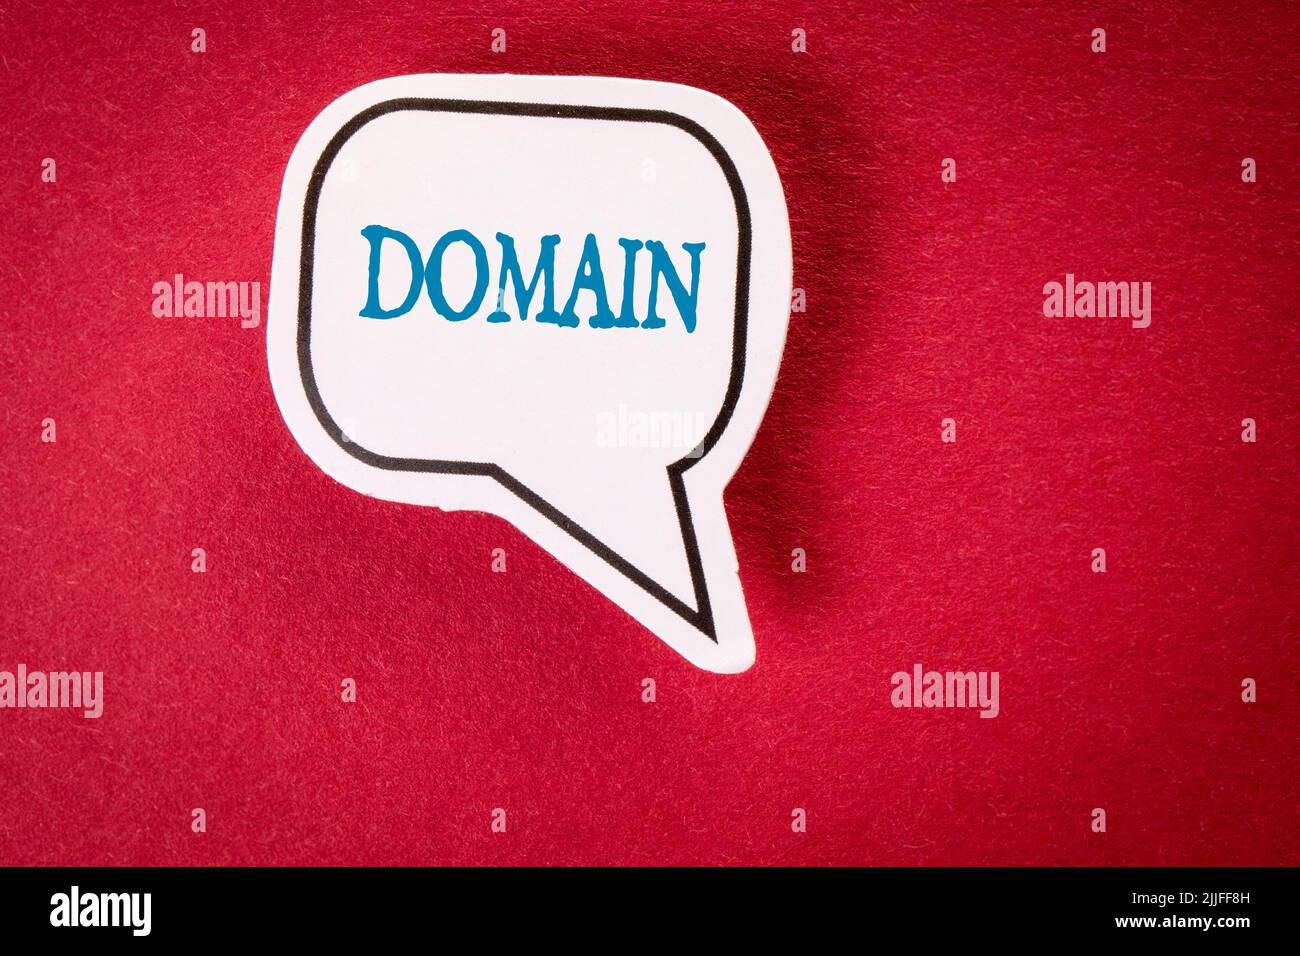 Homepage, Domain HTML Web Design Concept. Speech bubble on red background. Stock Photo